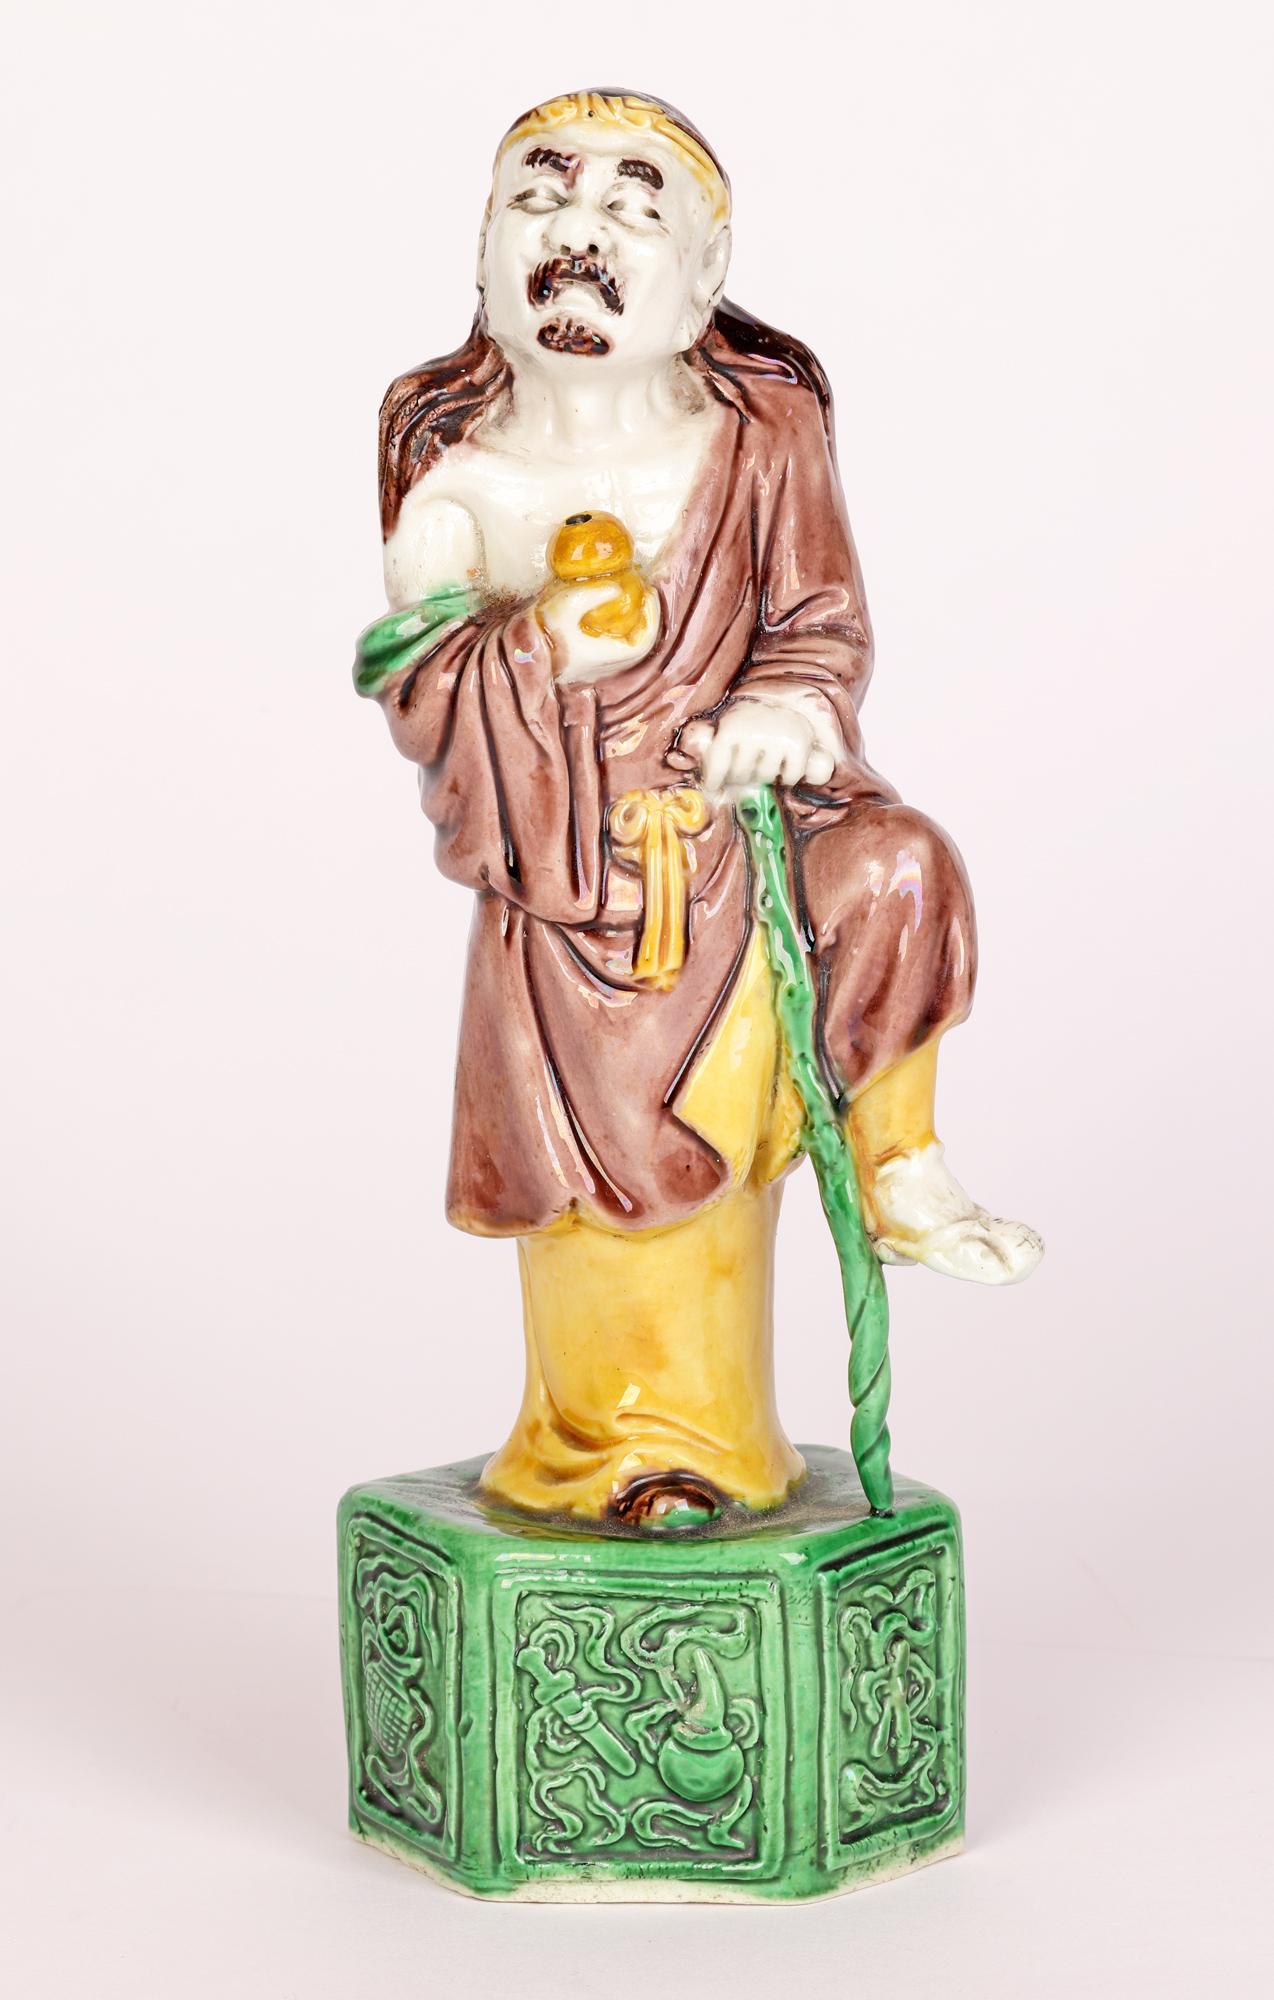 A fine antique Chinese porcelain figure of Immortal decorated in sancai glazes dating from 19th century. The figure stands raised on a six-sided pedestal base and is dressed in loosely fitting trousers and robe tied around the waist with his long